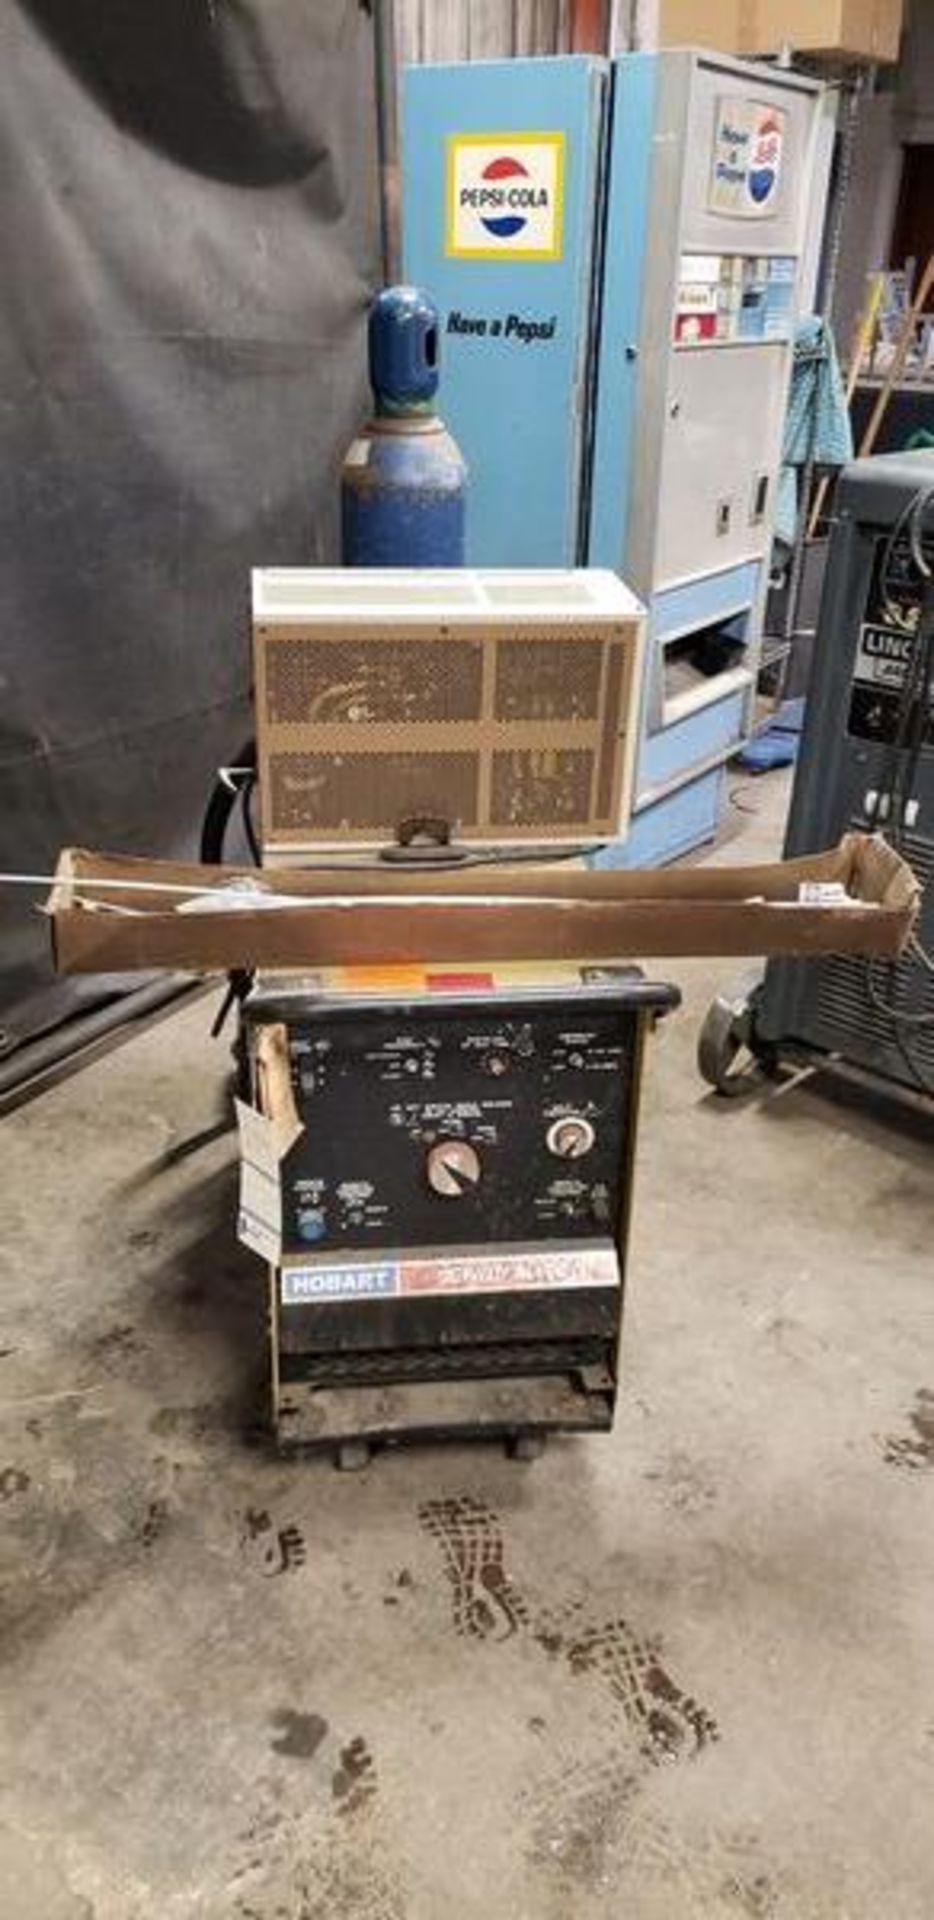 HOBART TIGWELD AC/DC WITH SOLA MINI UPS, TANK AND BOX OF WELDING WIRE